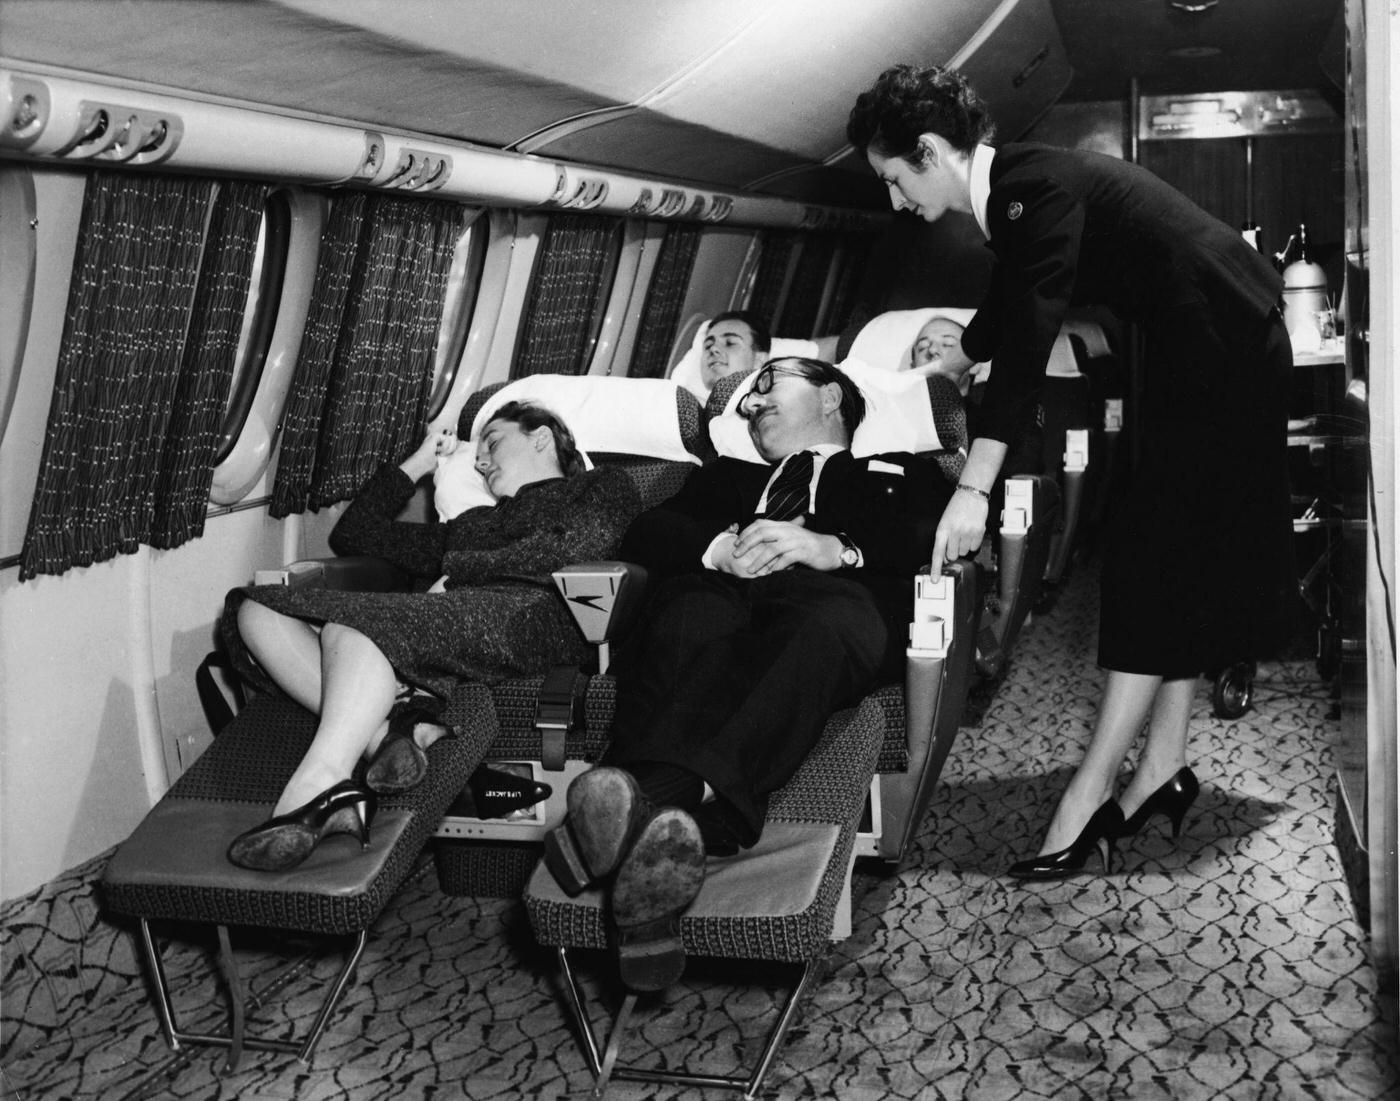 In the 1950s, an interior view of the first-class compartment of a commercial passenger plane shows a flight attendant bending forward to adjust the seat of a sleeping man.